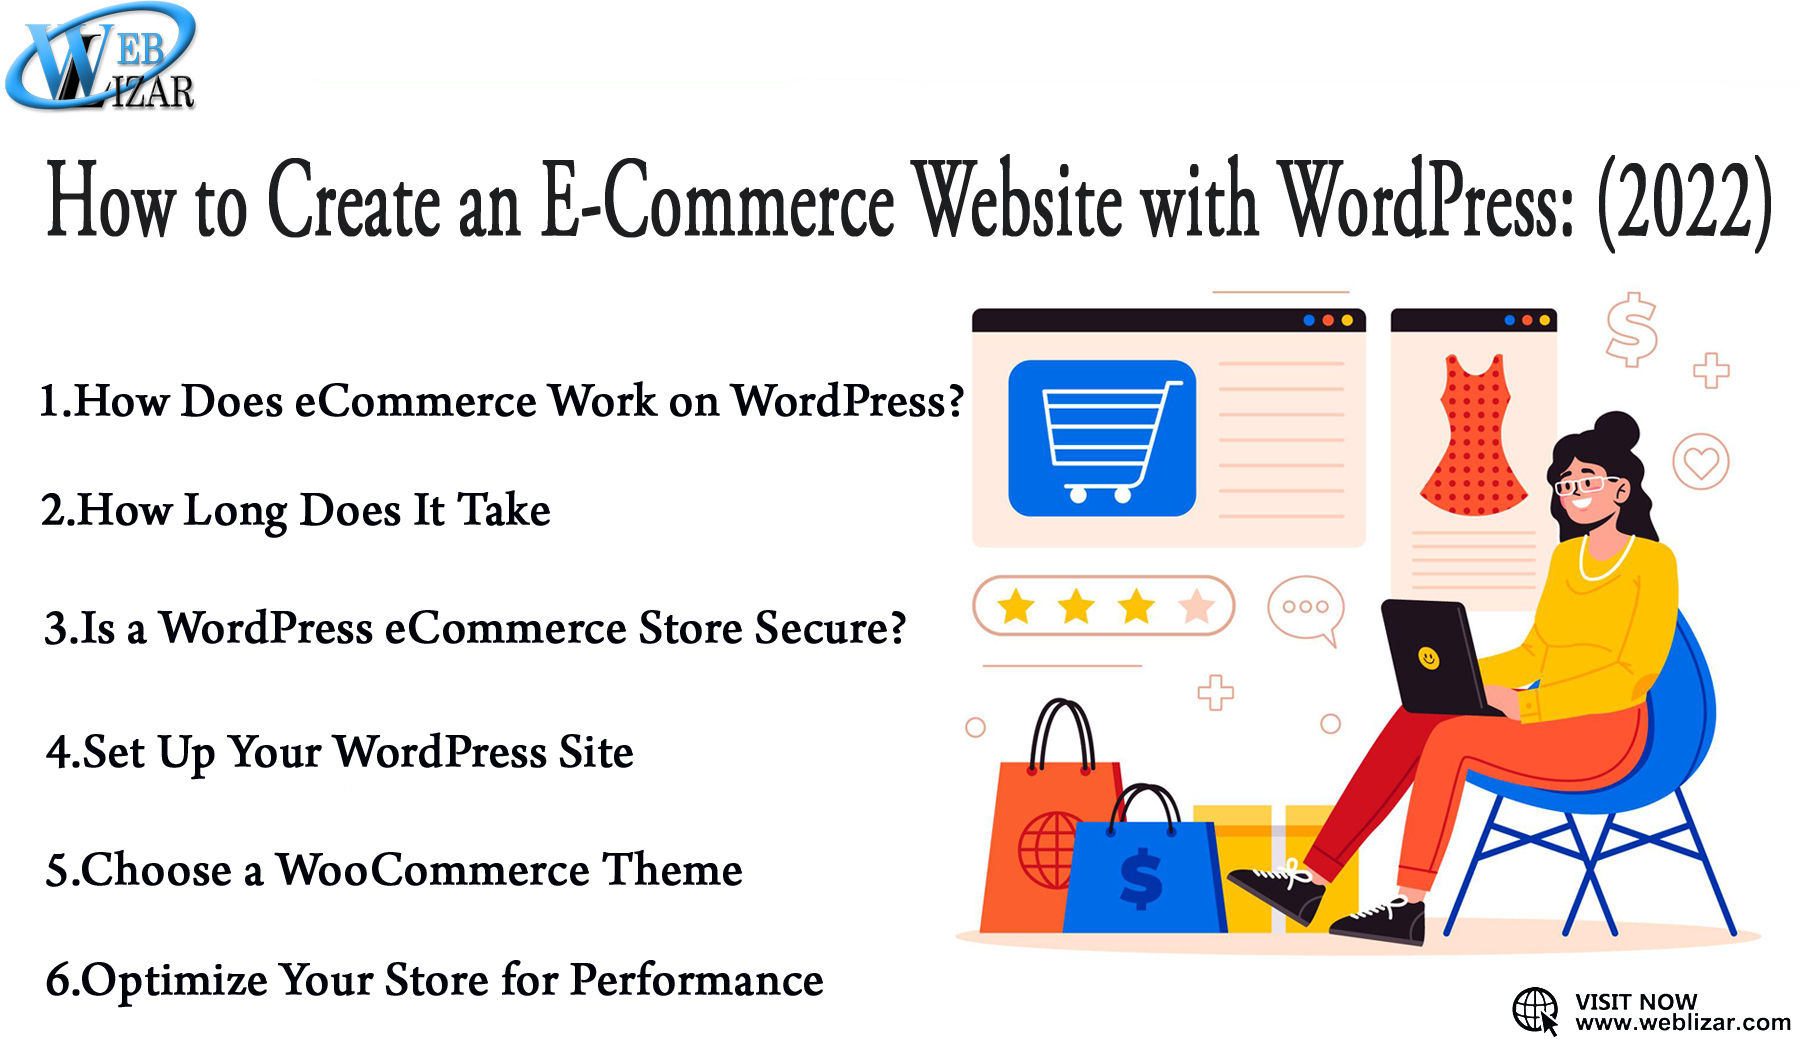 How to Build an eCommerce Website with WordPress? (2022)